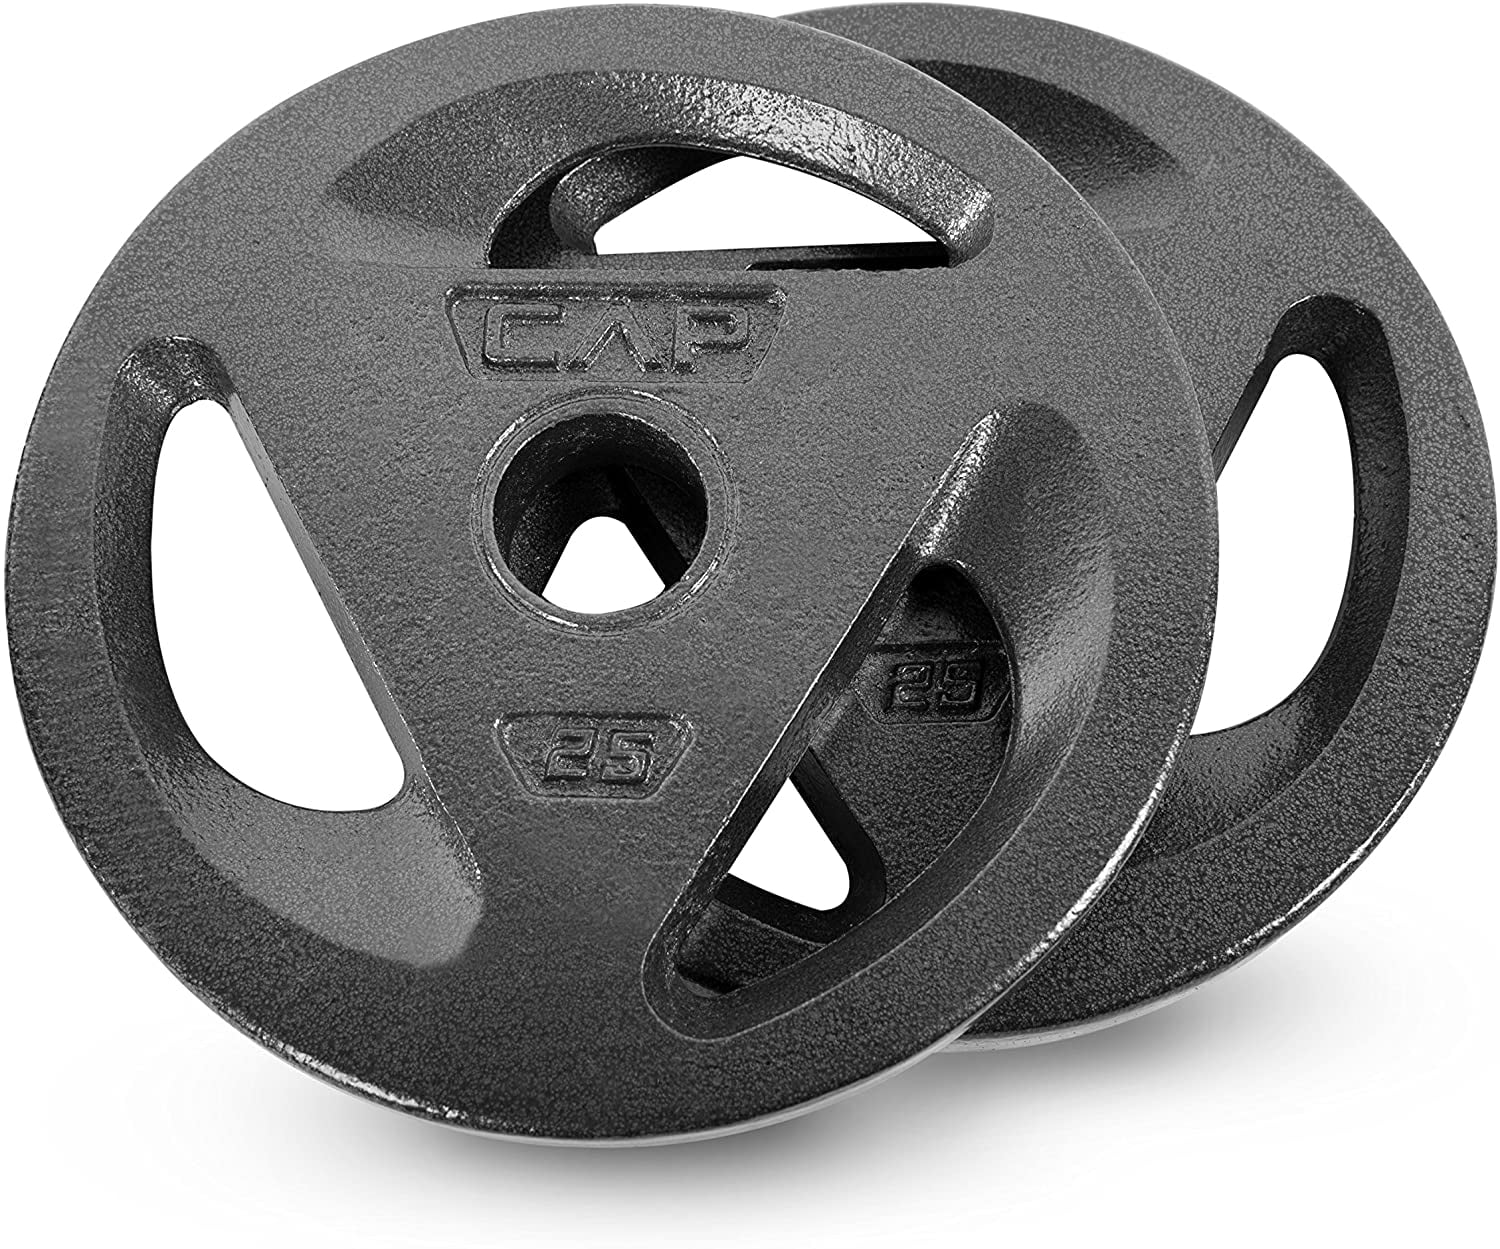 Standard 1" Center Pair Set 20lbs 4  DP Fit For Life 5 lb Iron Weight Plates